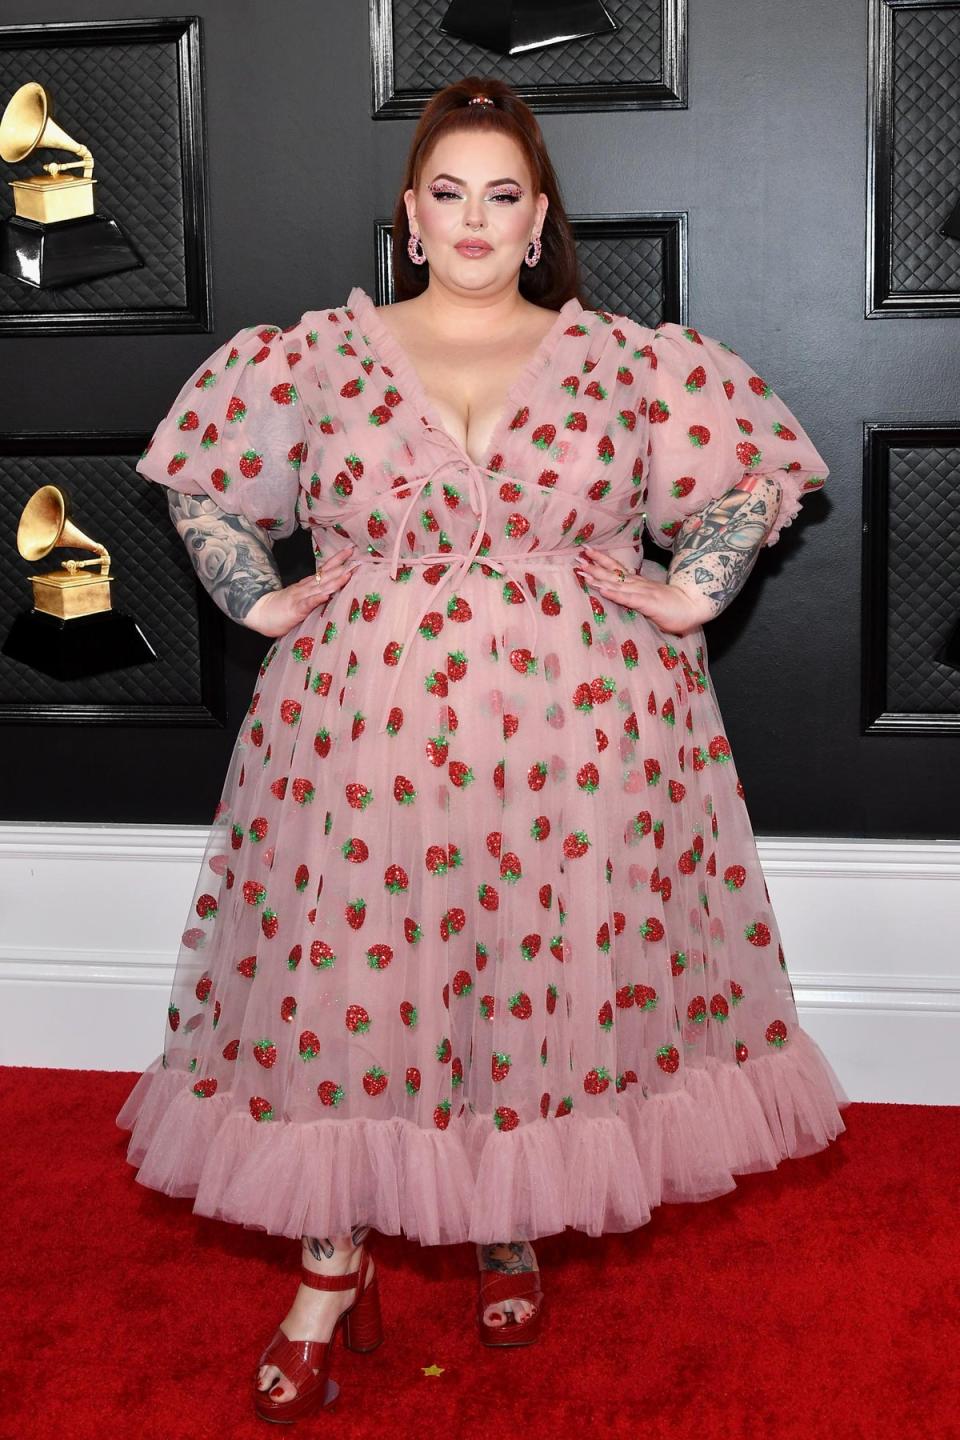 Model Tess Holliday has accused Paltrow of “glorifying” eating disorders (Getty Images)